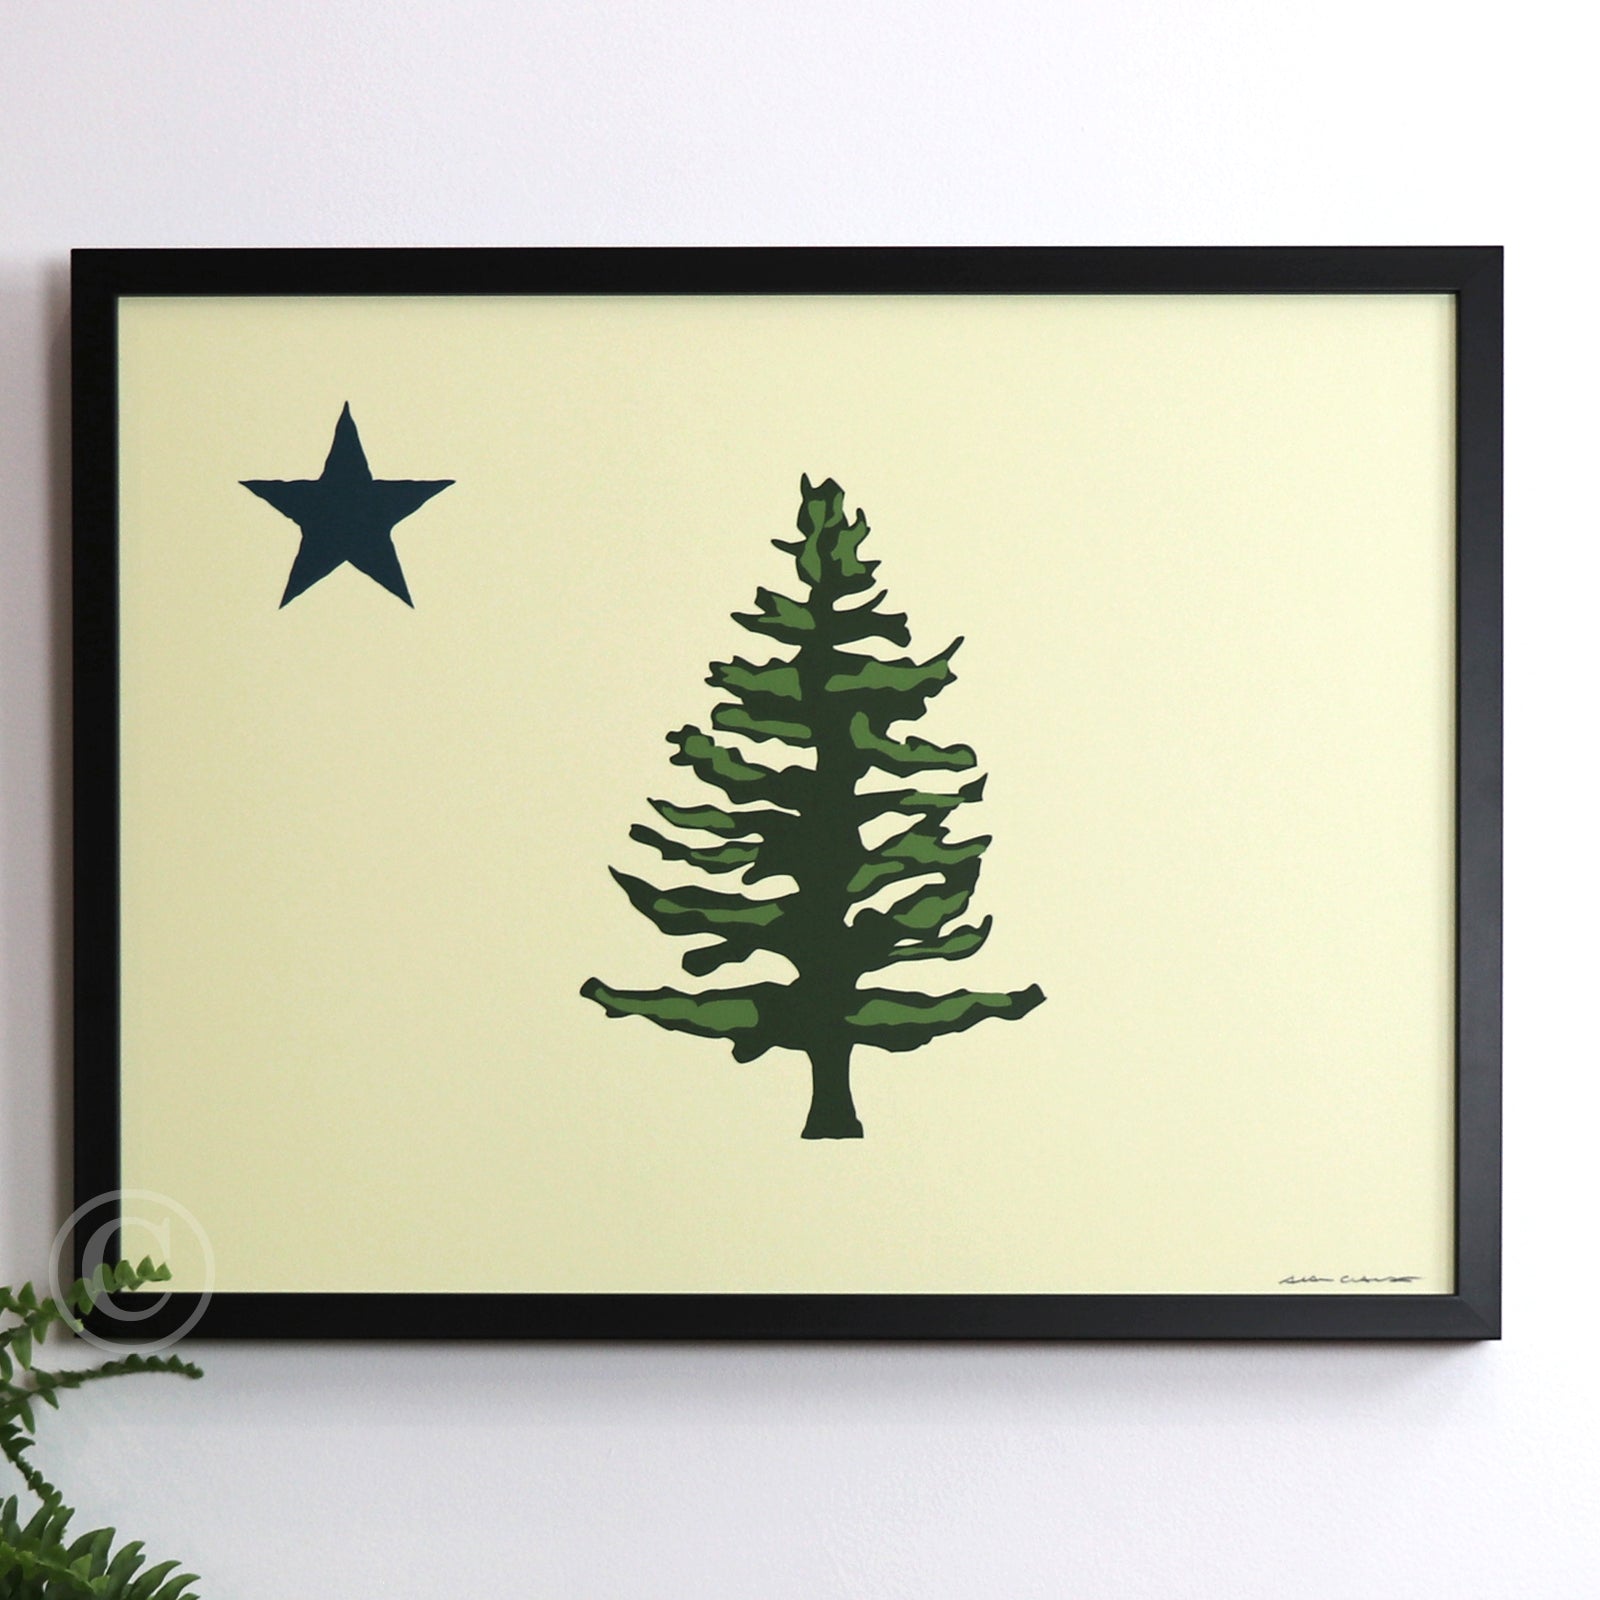 1901 Maine State Flag Art Print 18" x 24" Horizontal Framed Wall Poster By Alan Claude - Maine